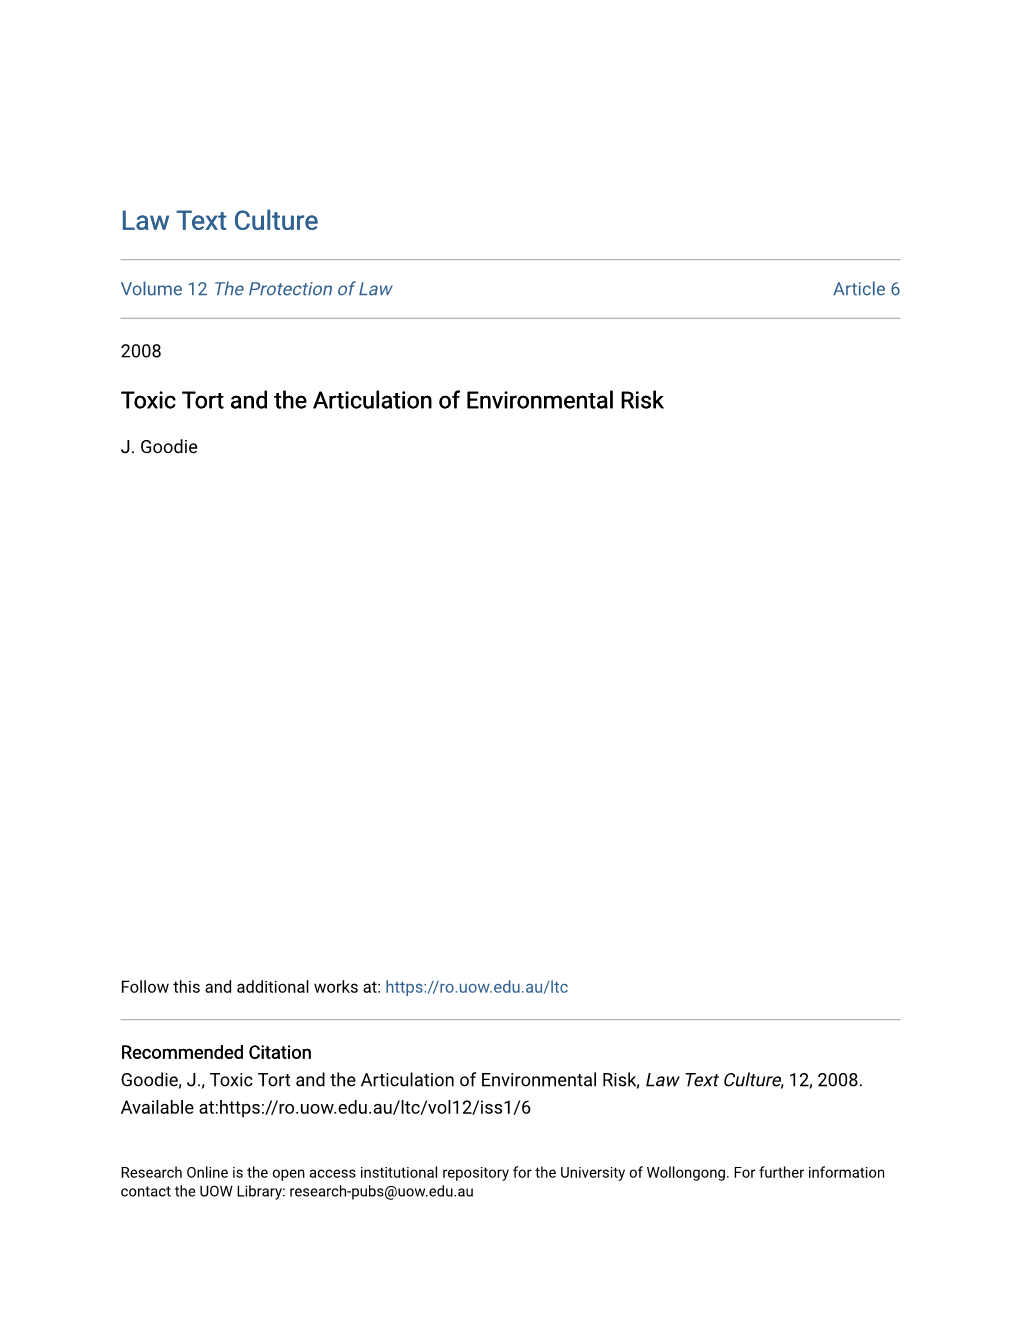 Toxic Tort and the Articulation of Environmental Risk